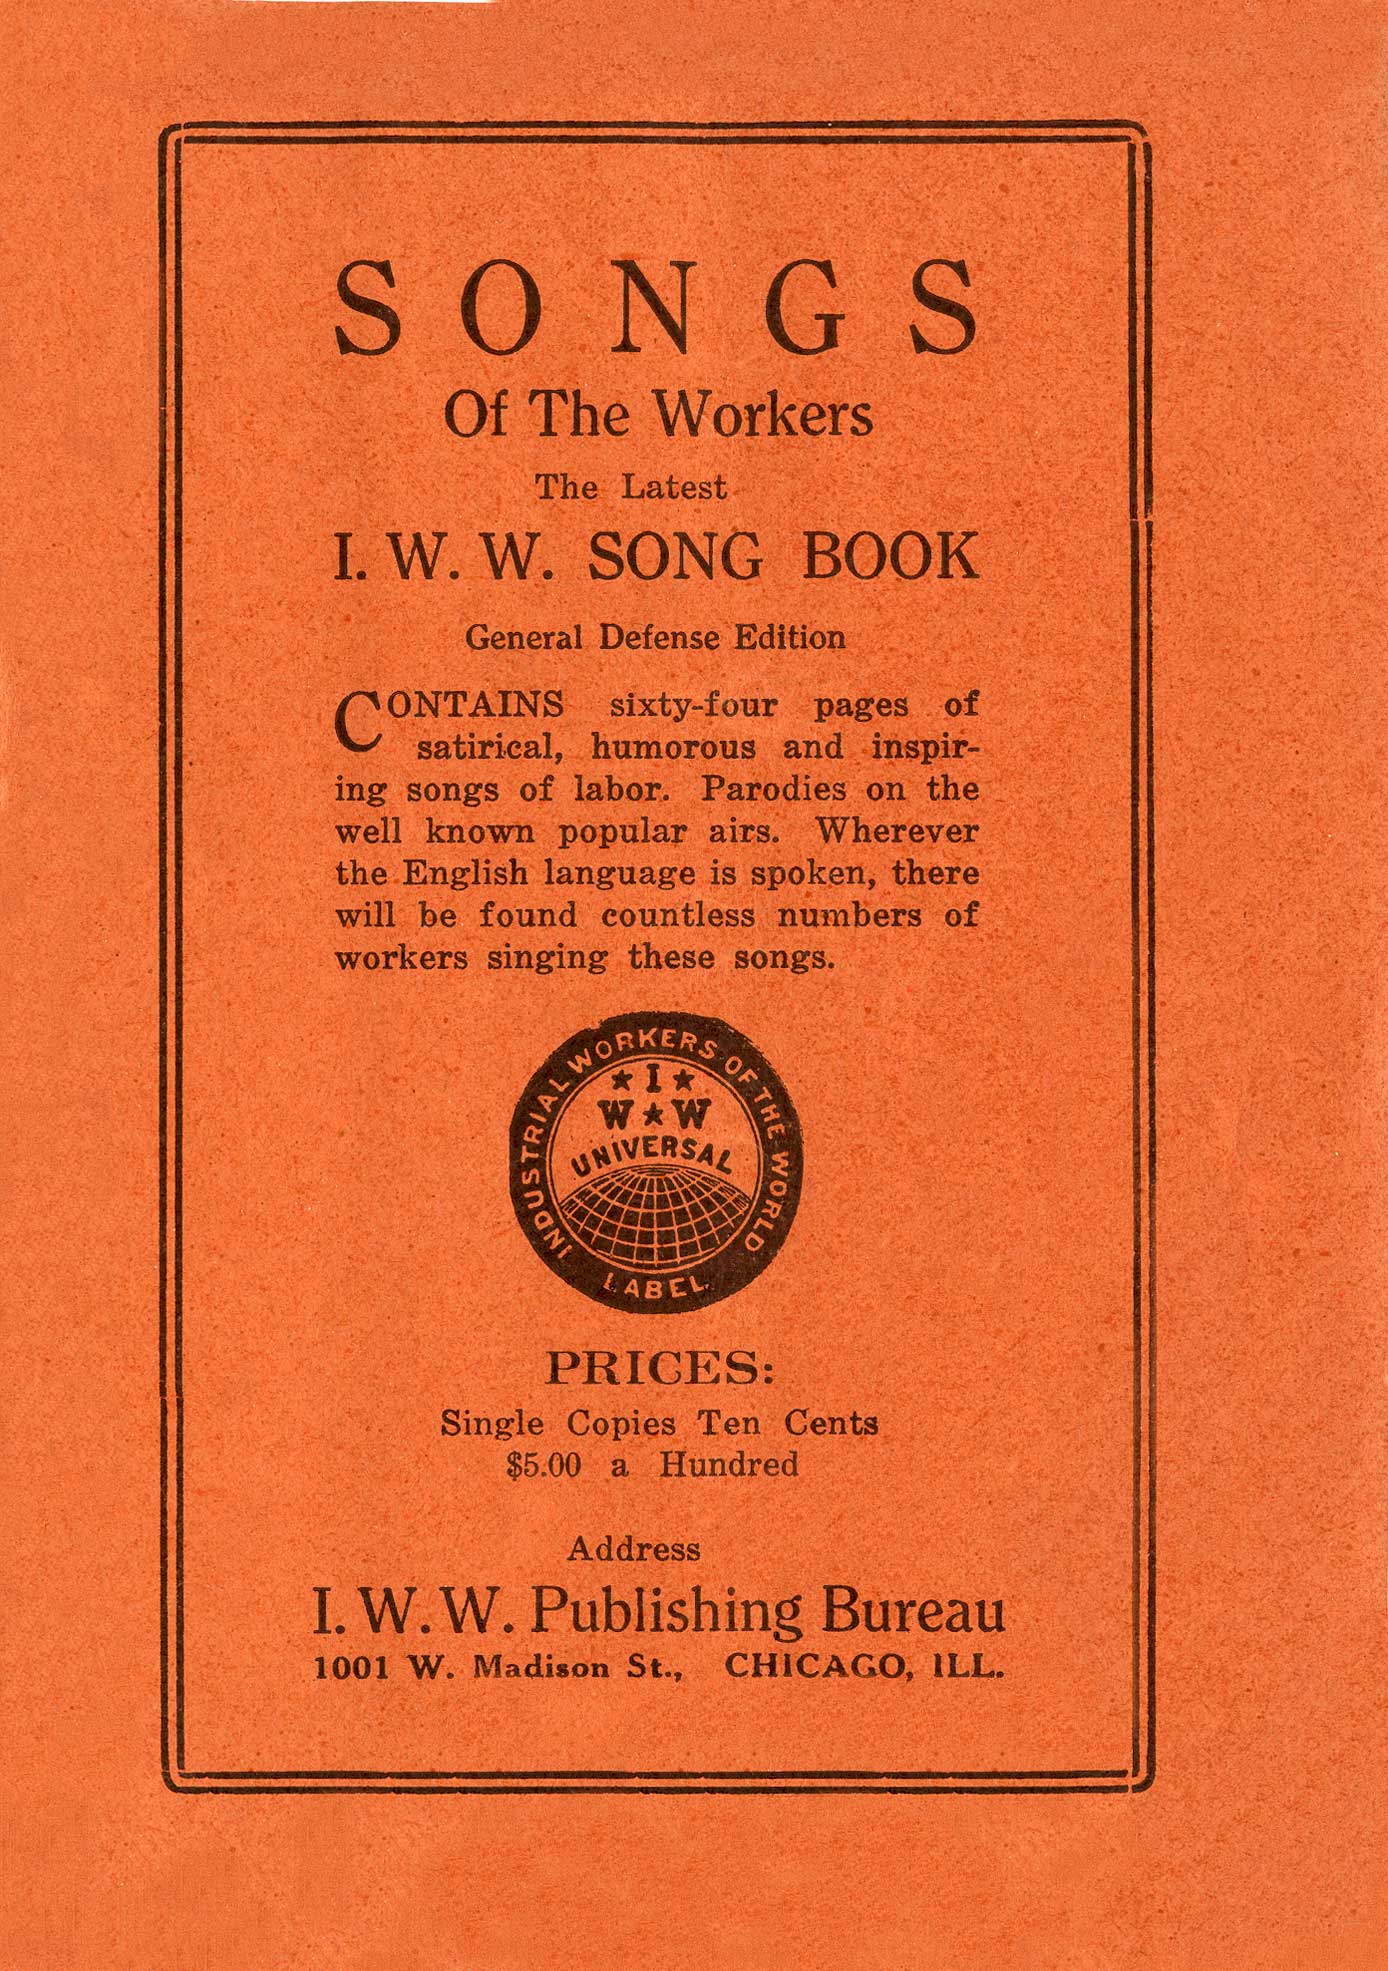 Advertisement for "Songs of the Workers"